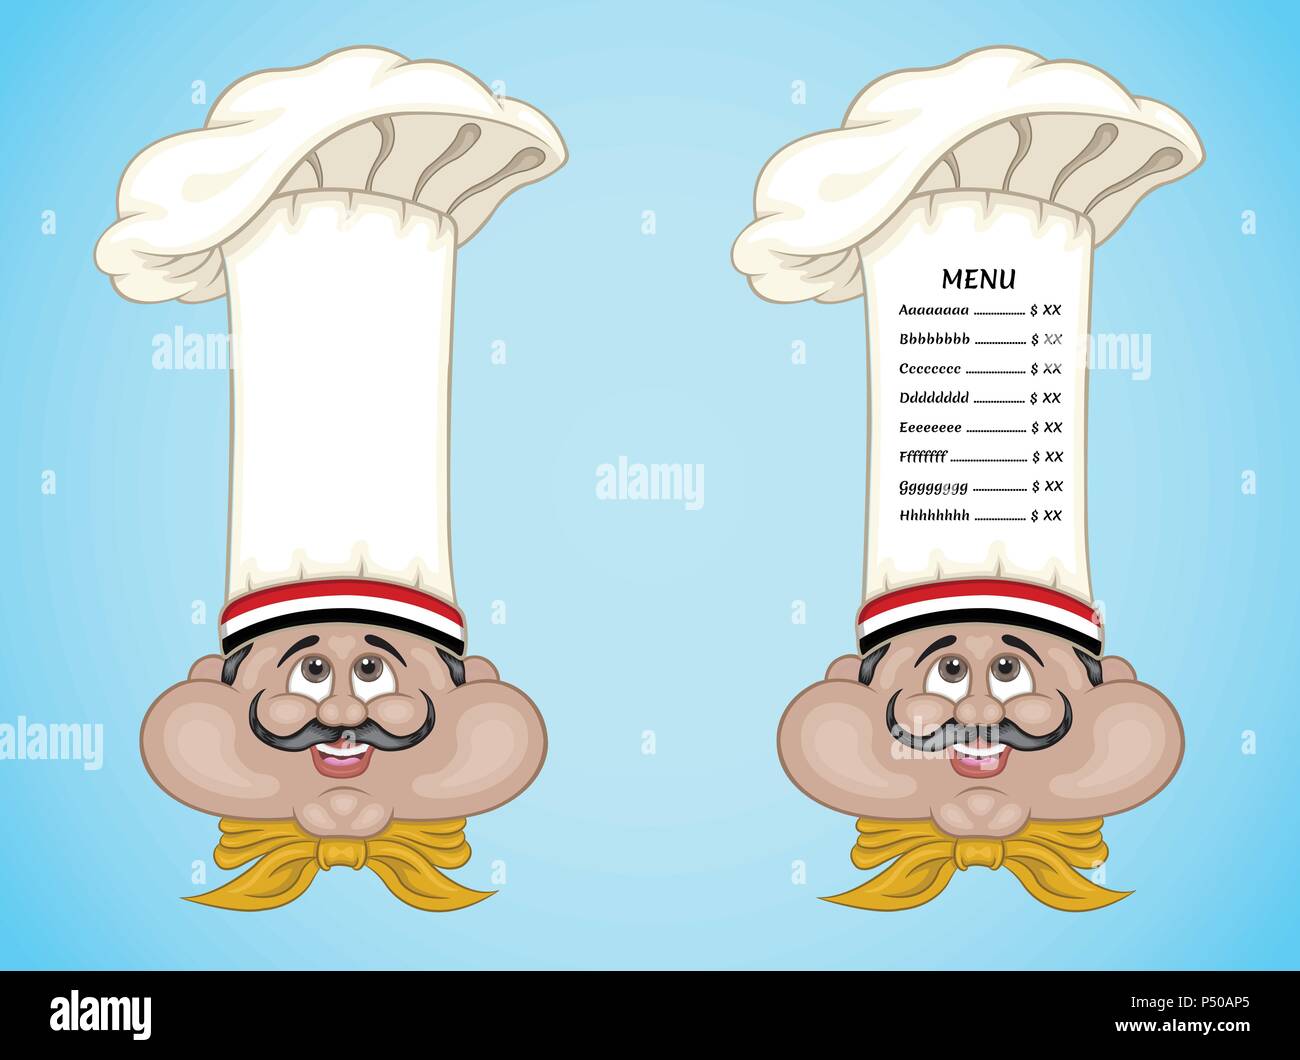 Egyptian chef and menu on hat with food of Egypt. All the objects are in different layers and the menu text types do not need any font. Stock Vector